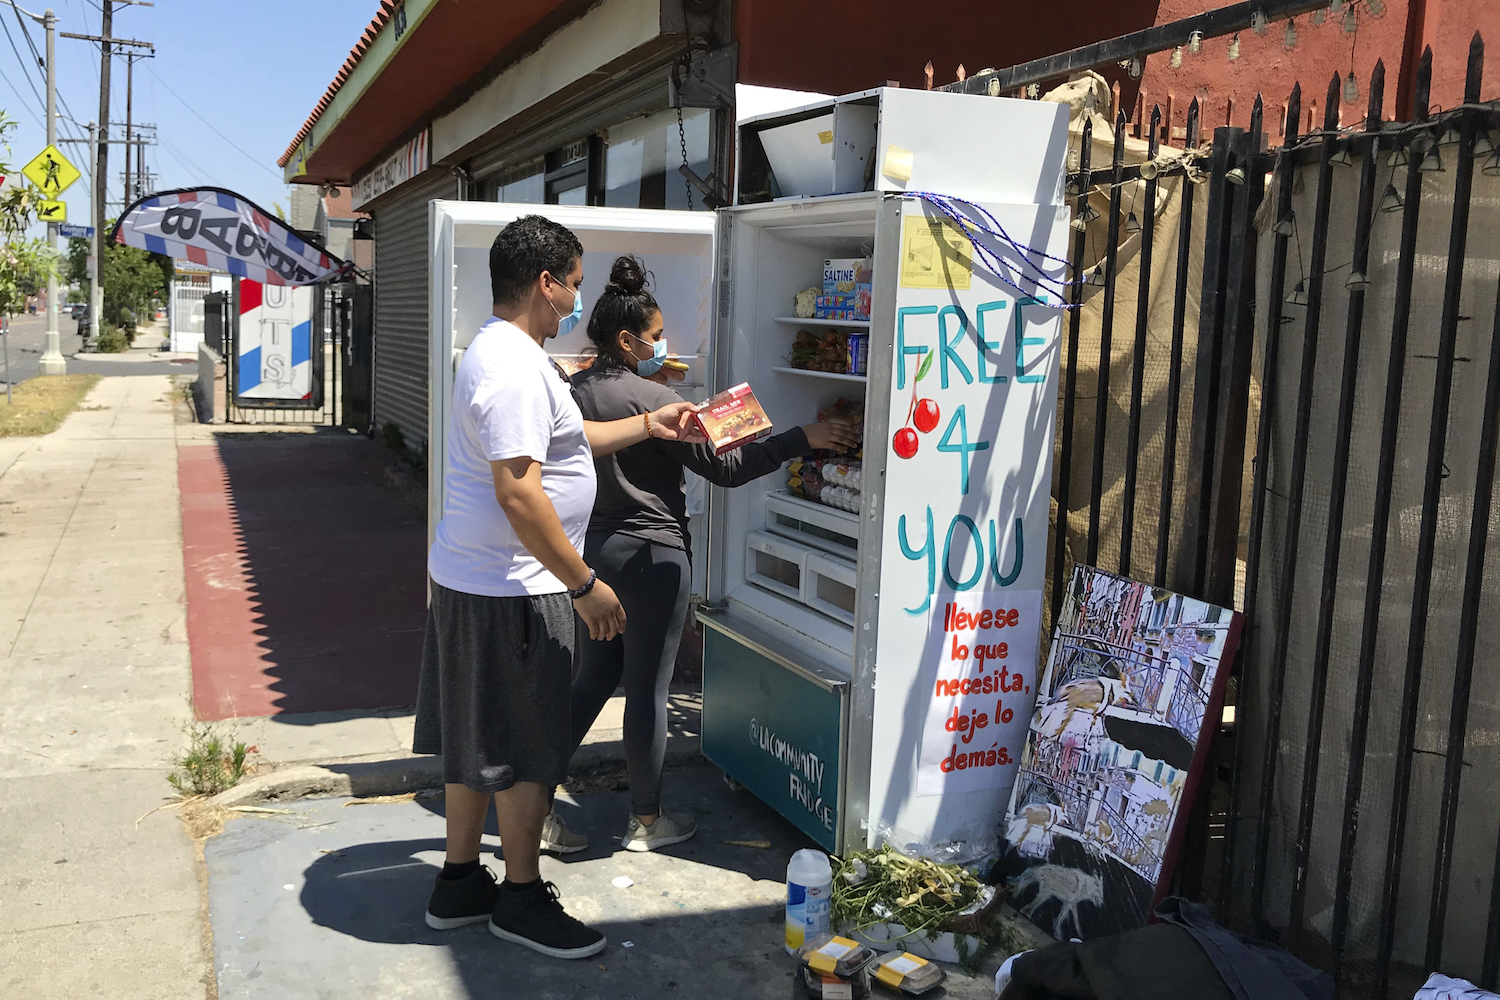 Volunteers Bryant Rodriguez and his daughter Vanessa stock a refrigerator with free food in Los Angeles. July 20, 2020.